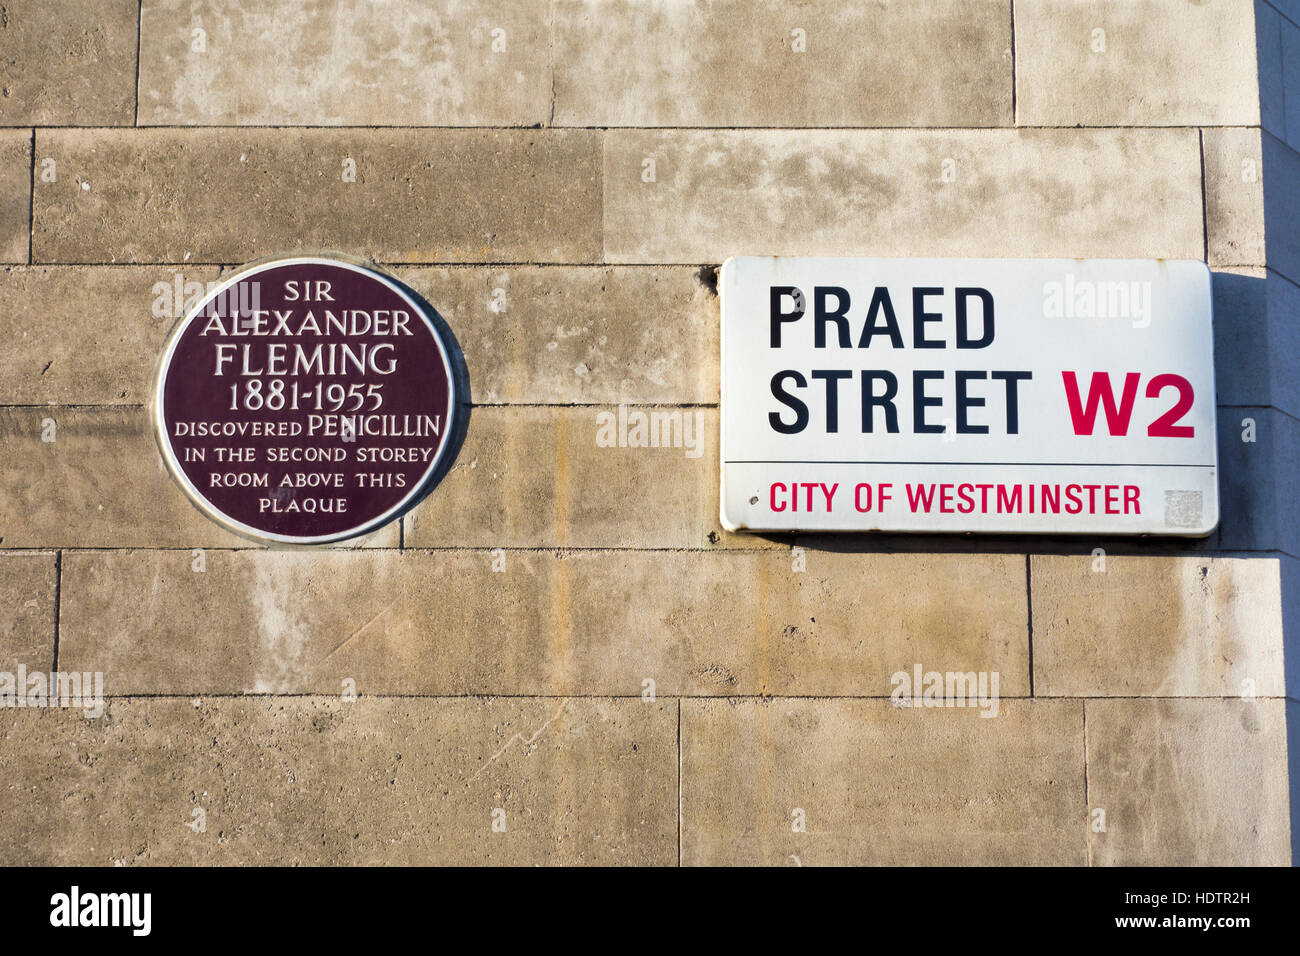 Plaque showing the site Alexander Fleming discovered penicillin. Praed Street, London, UK Stock Photo